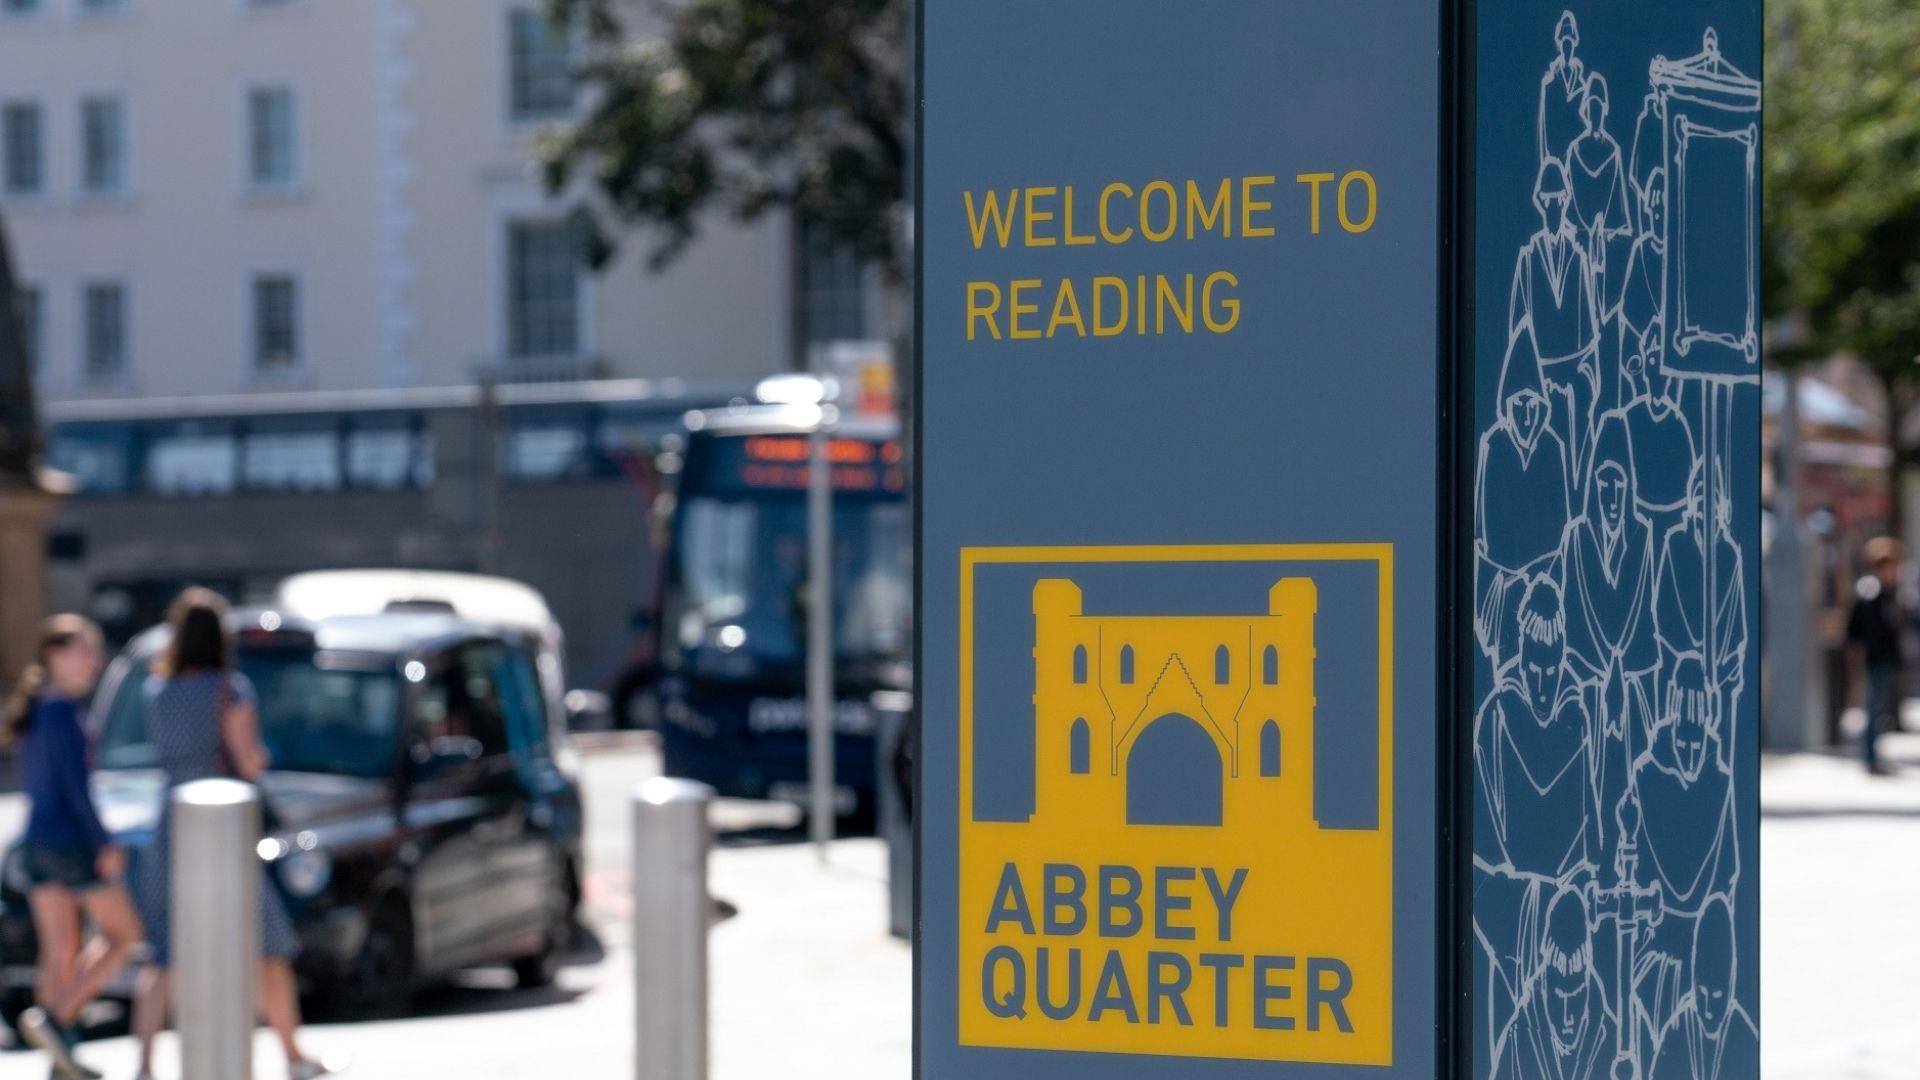 Reading's Abbey Quarter welcome sign